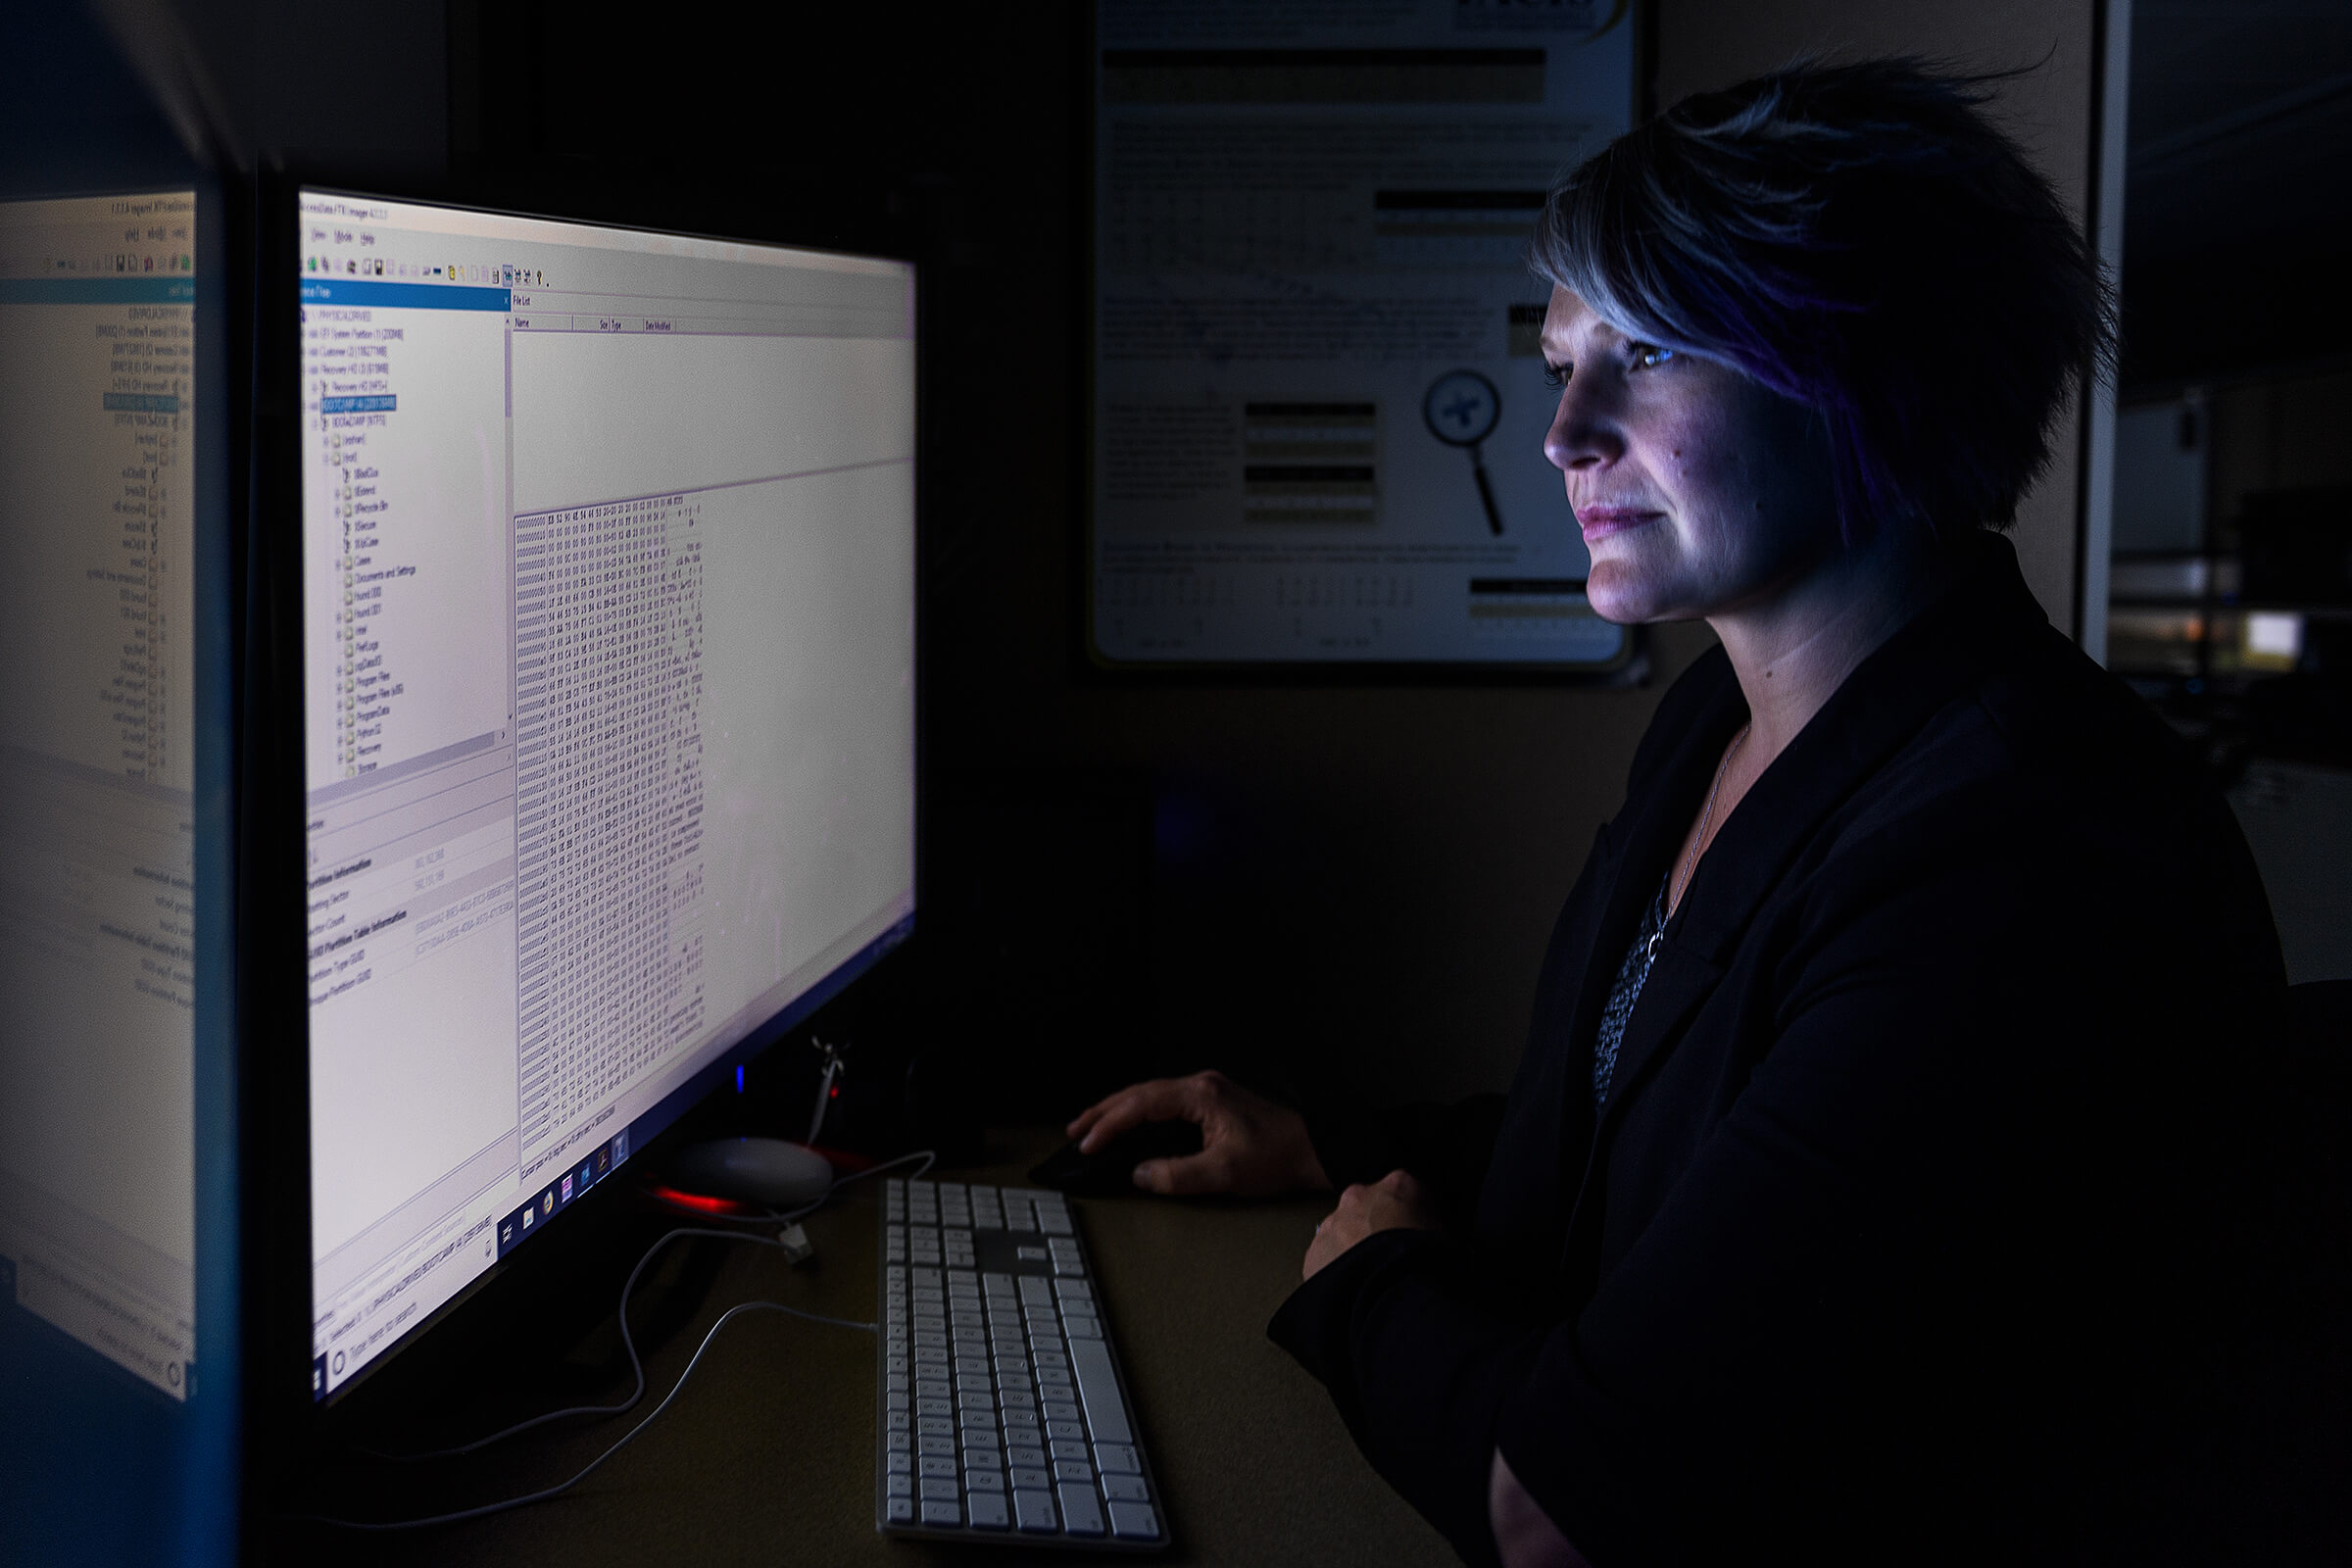 Download Pronography - Who takes care of the police officers dealing with child pornography,  cyberdeviance? A Purdue professor is reaching out - Purdue University News